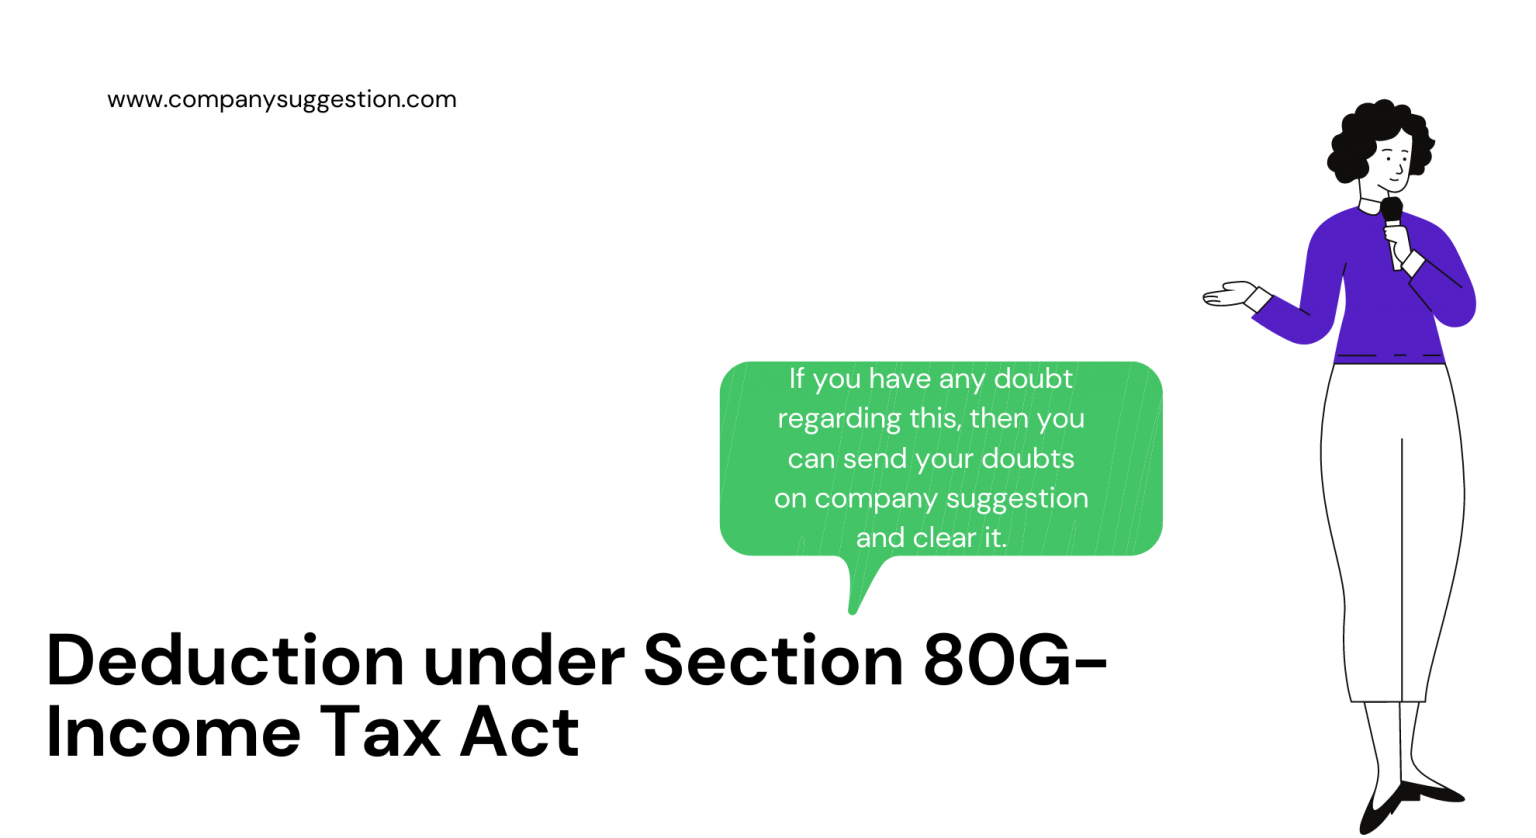 deduction-under-section-80g-income-tax-act-company-suggestion